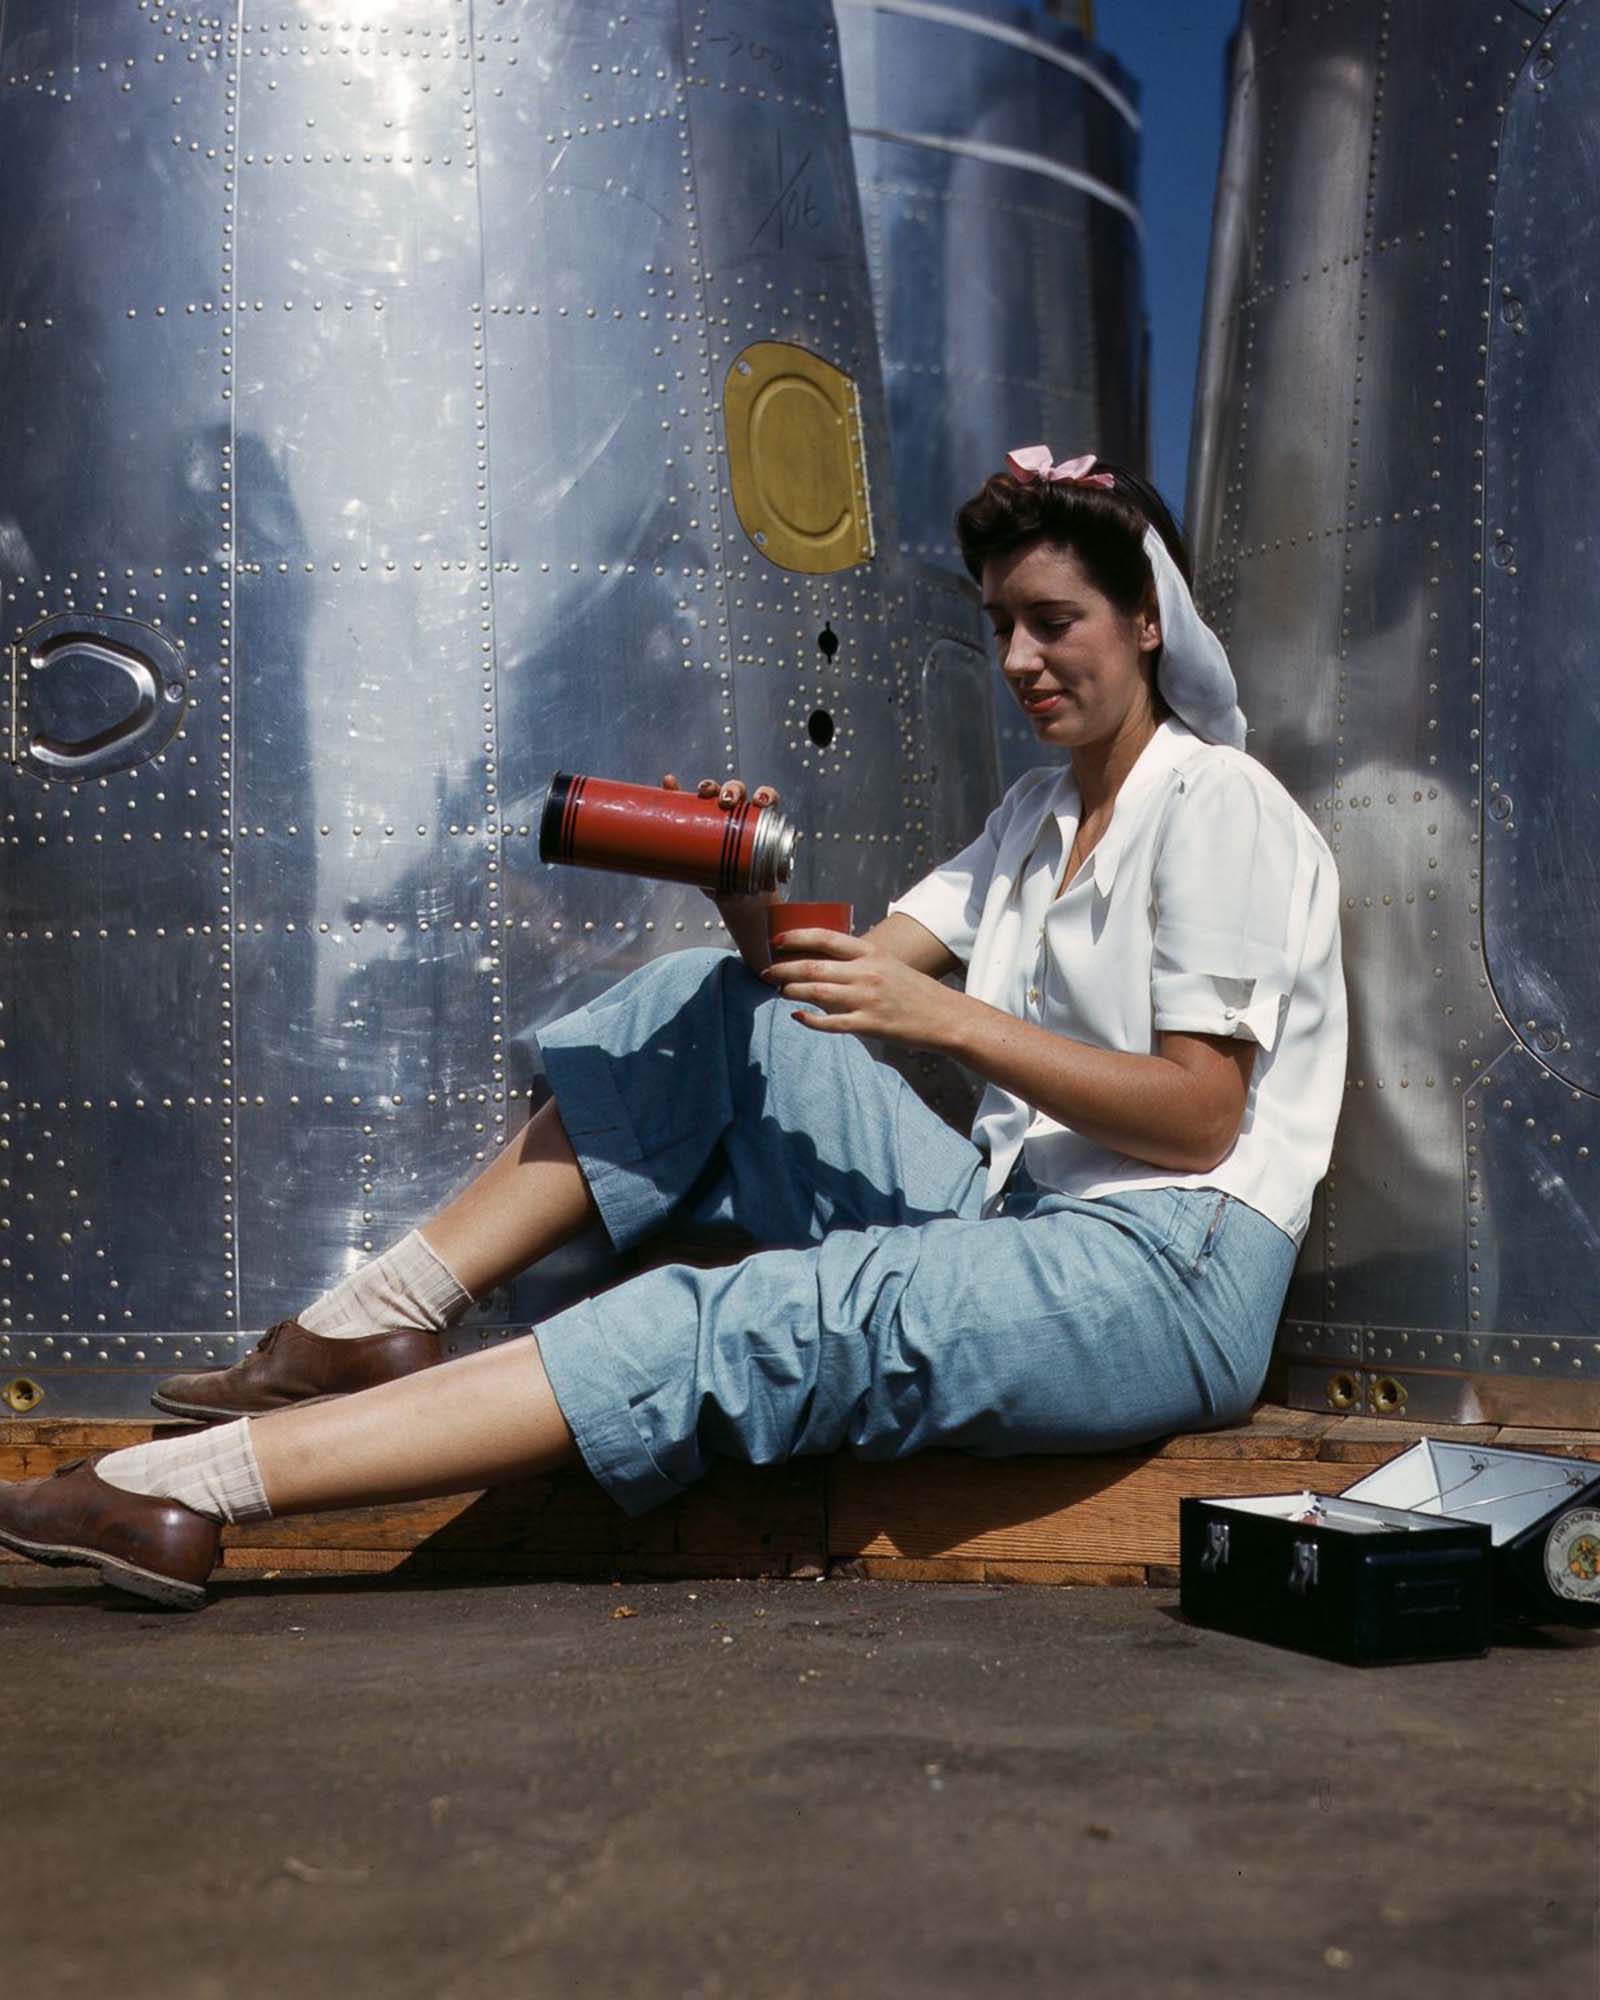 A Douglas Aircraft Company employee on her lunch break at the plant in Long Beach, California, 1942.